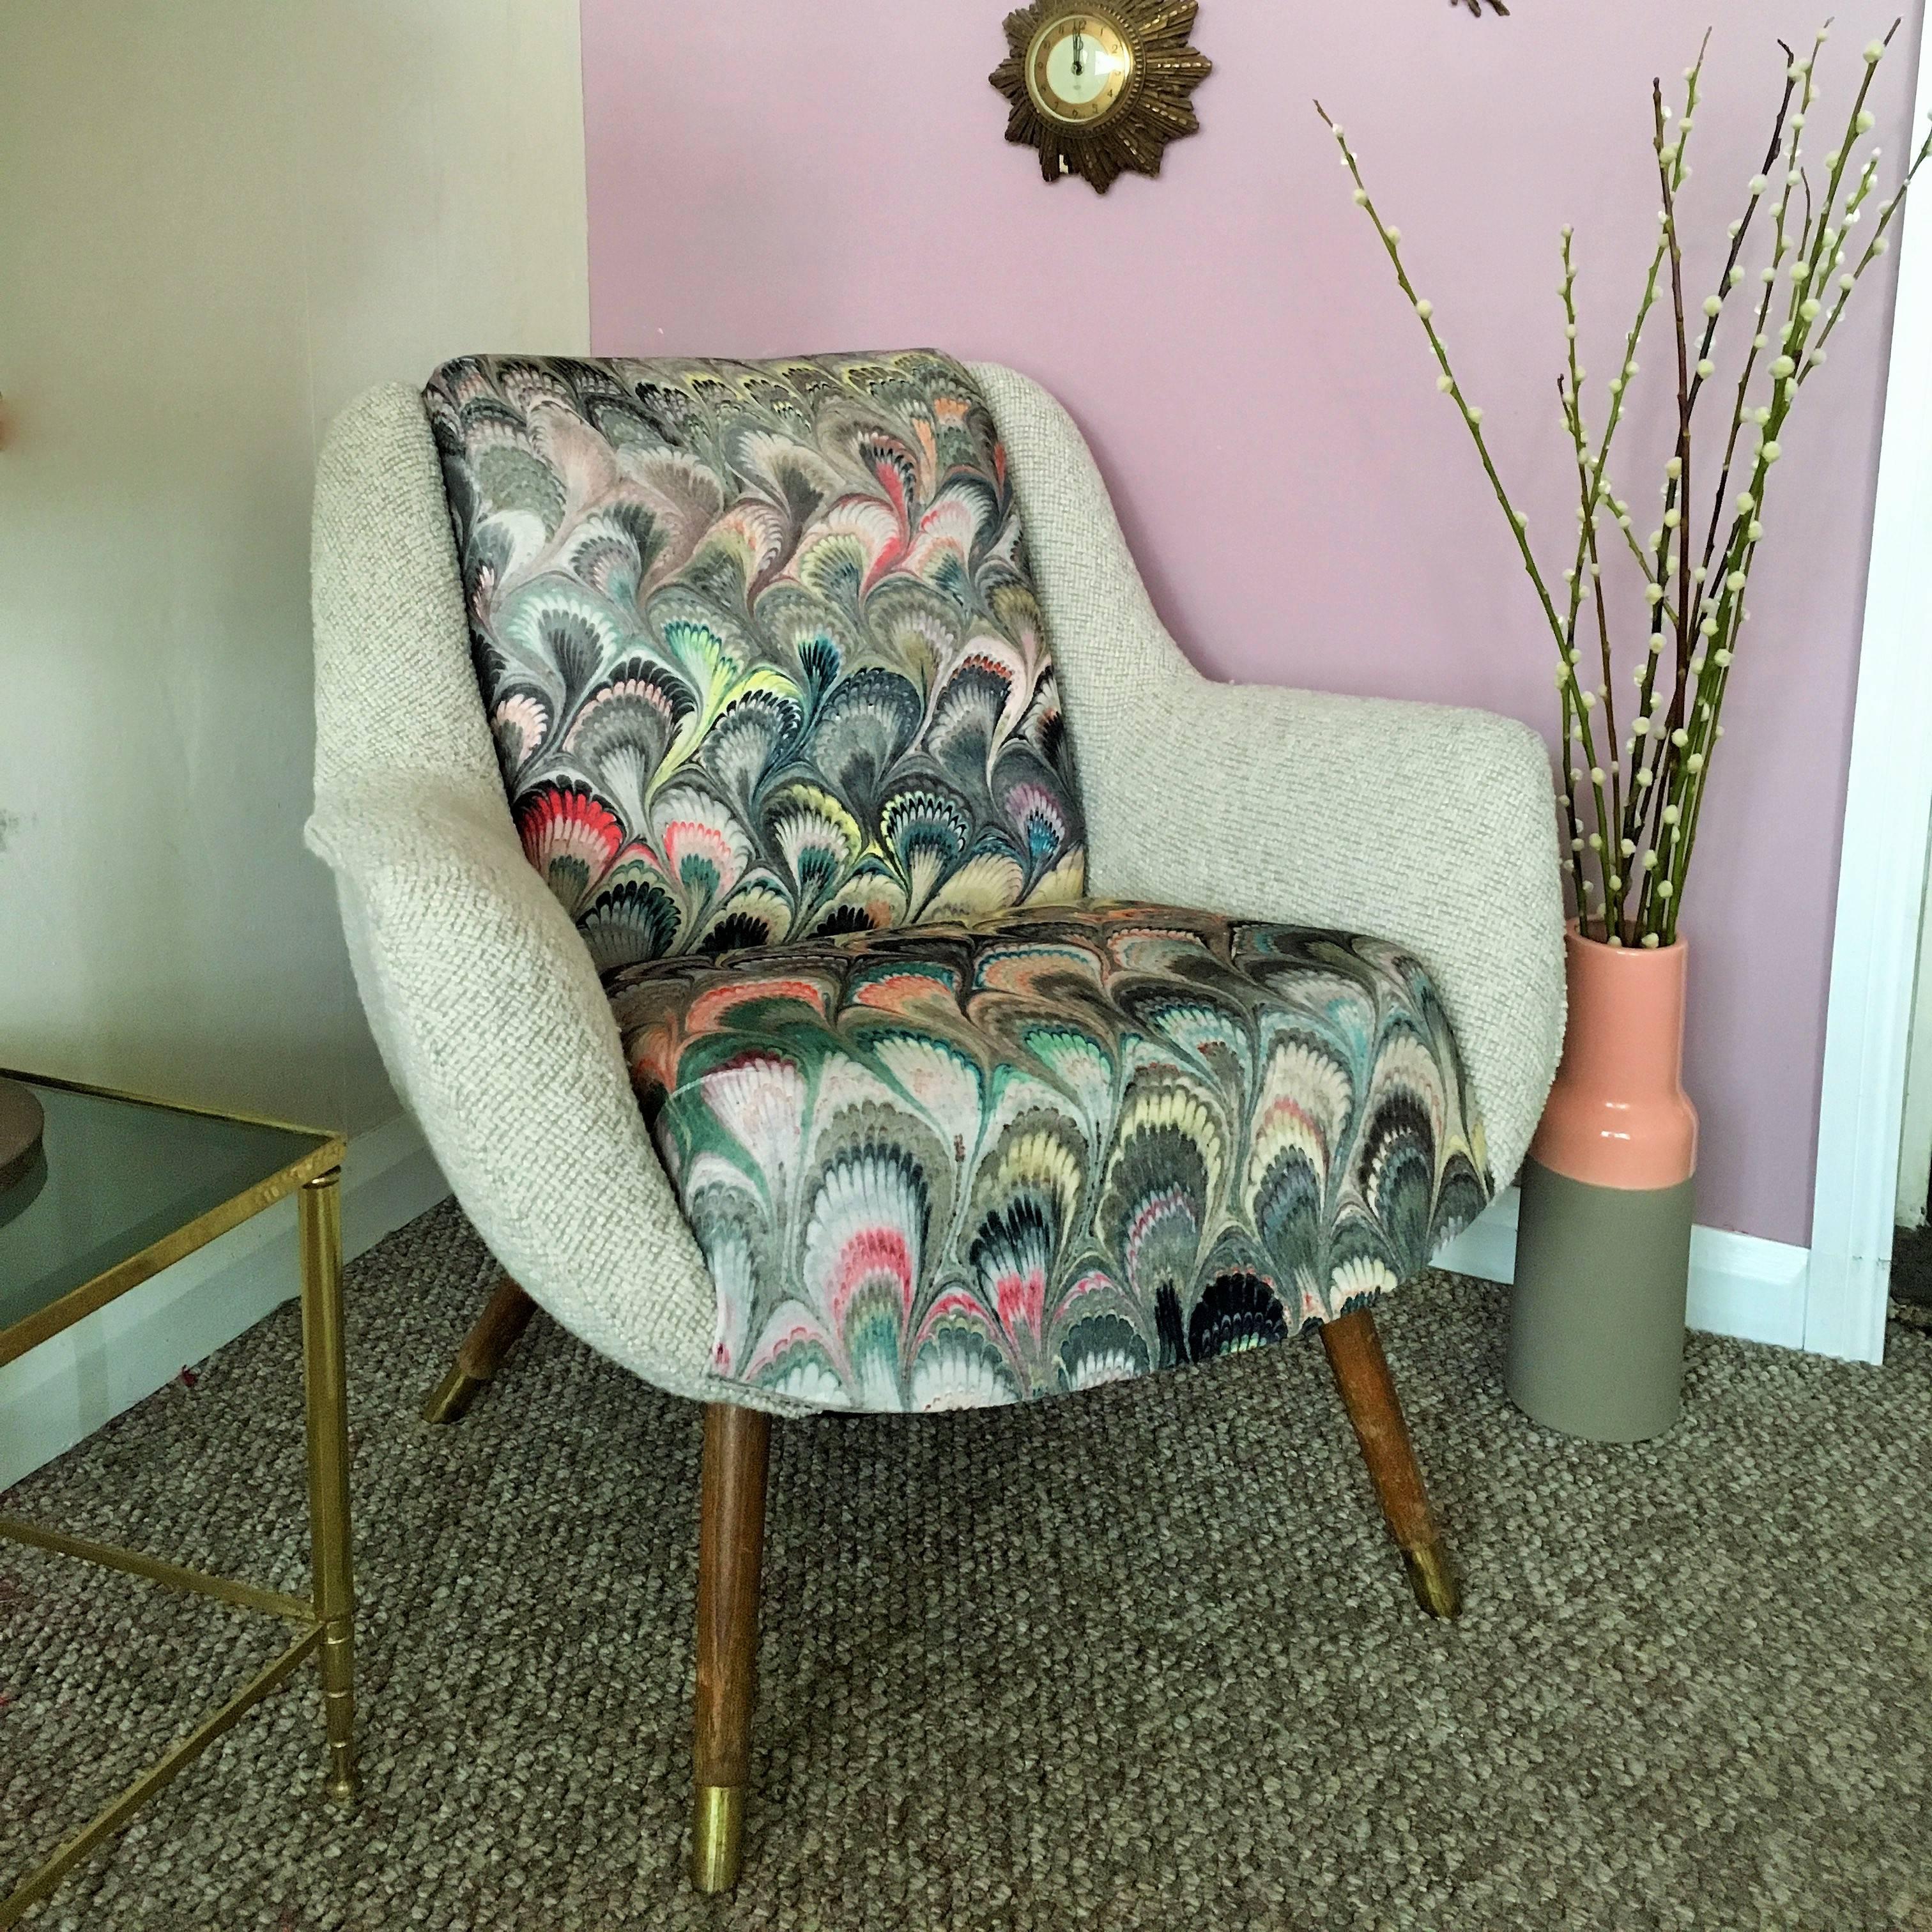 Vintage Danish tub chair professionally re-upholstered in a light grey bouclé fabric on the arms, with the back and seat covered in a unique marbleized fabric by interior designer Beata Heuman.
 
The chair is finished with wooden legs with brass